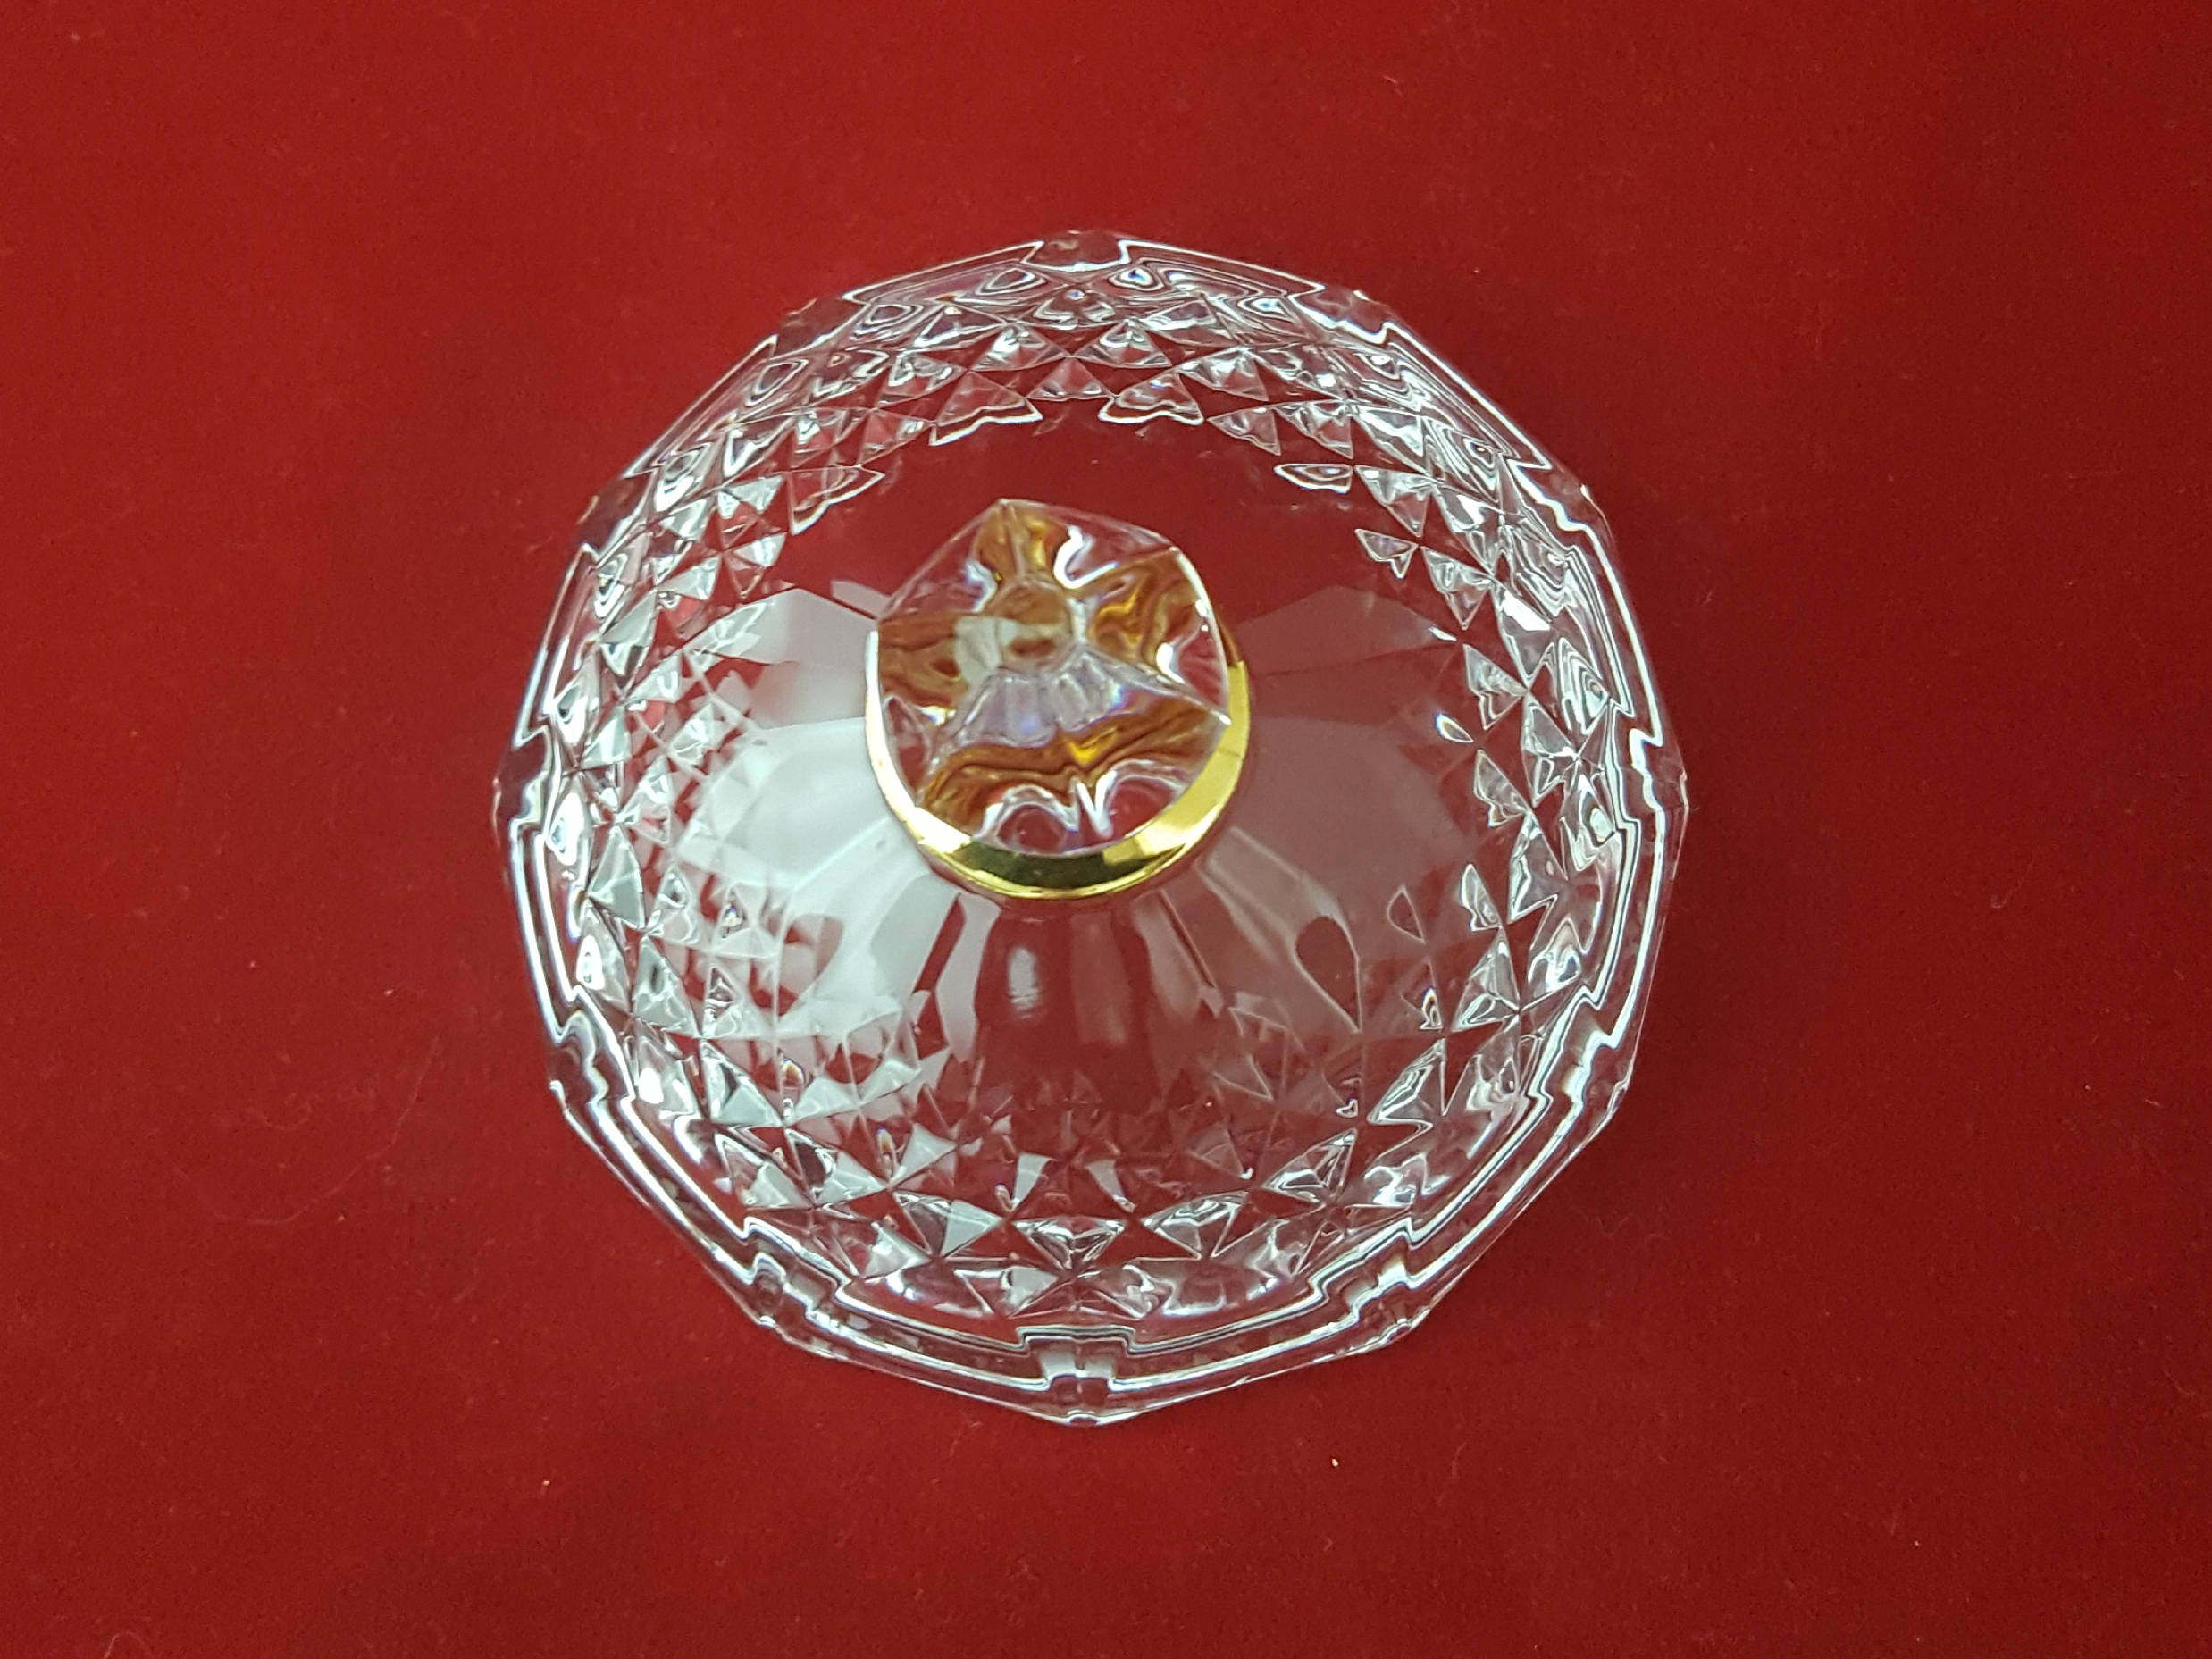 16 Lovely Cristal D Arques Lead Crystal Vase 2024 free download cristal d arques lead crystal vase of cristal darques durand longchamp gold candy dish lid etsy with dc29fc294c28ezoom